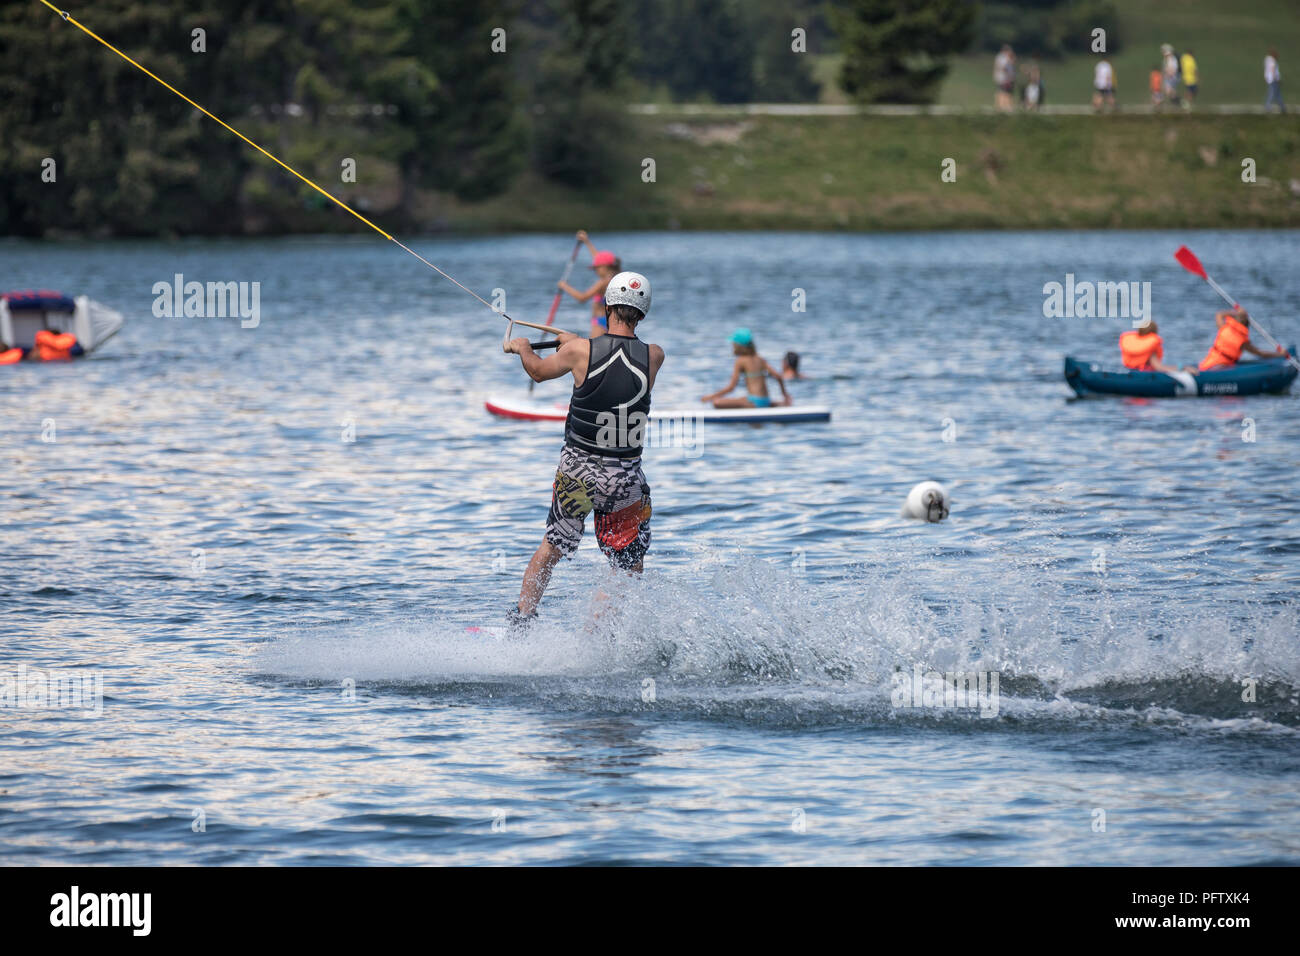 wake boarding with a cable on the lake Stock Photo